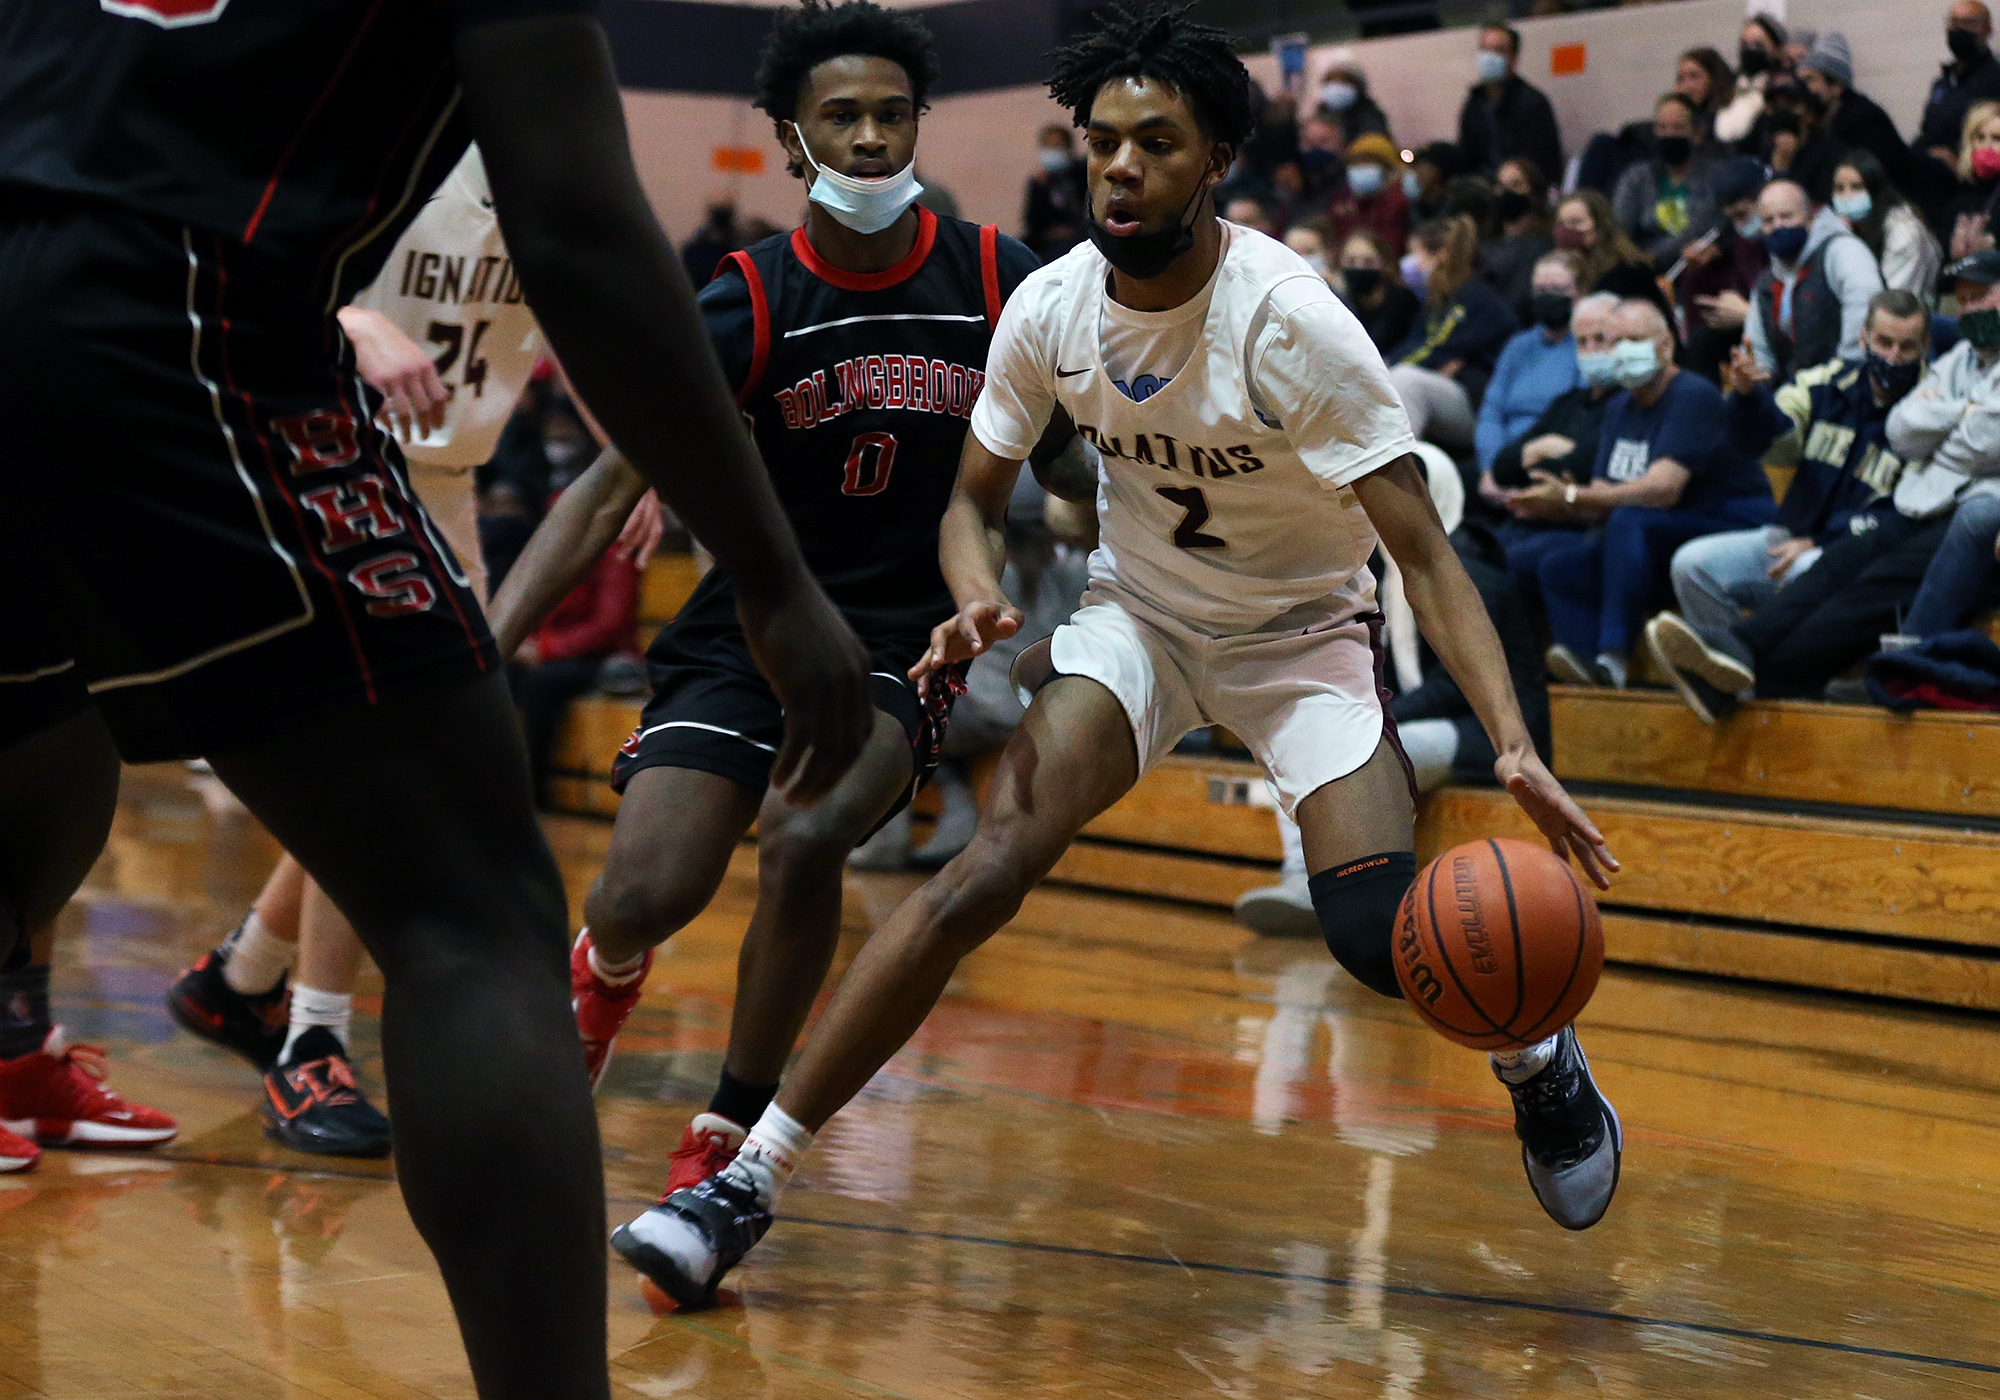 St. Ignatius’s A.J. Redd (2) controls the ball as the Wolfpack plays Bolingbrook.